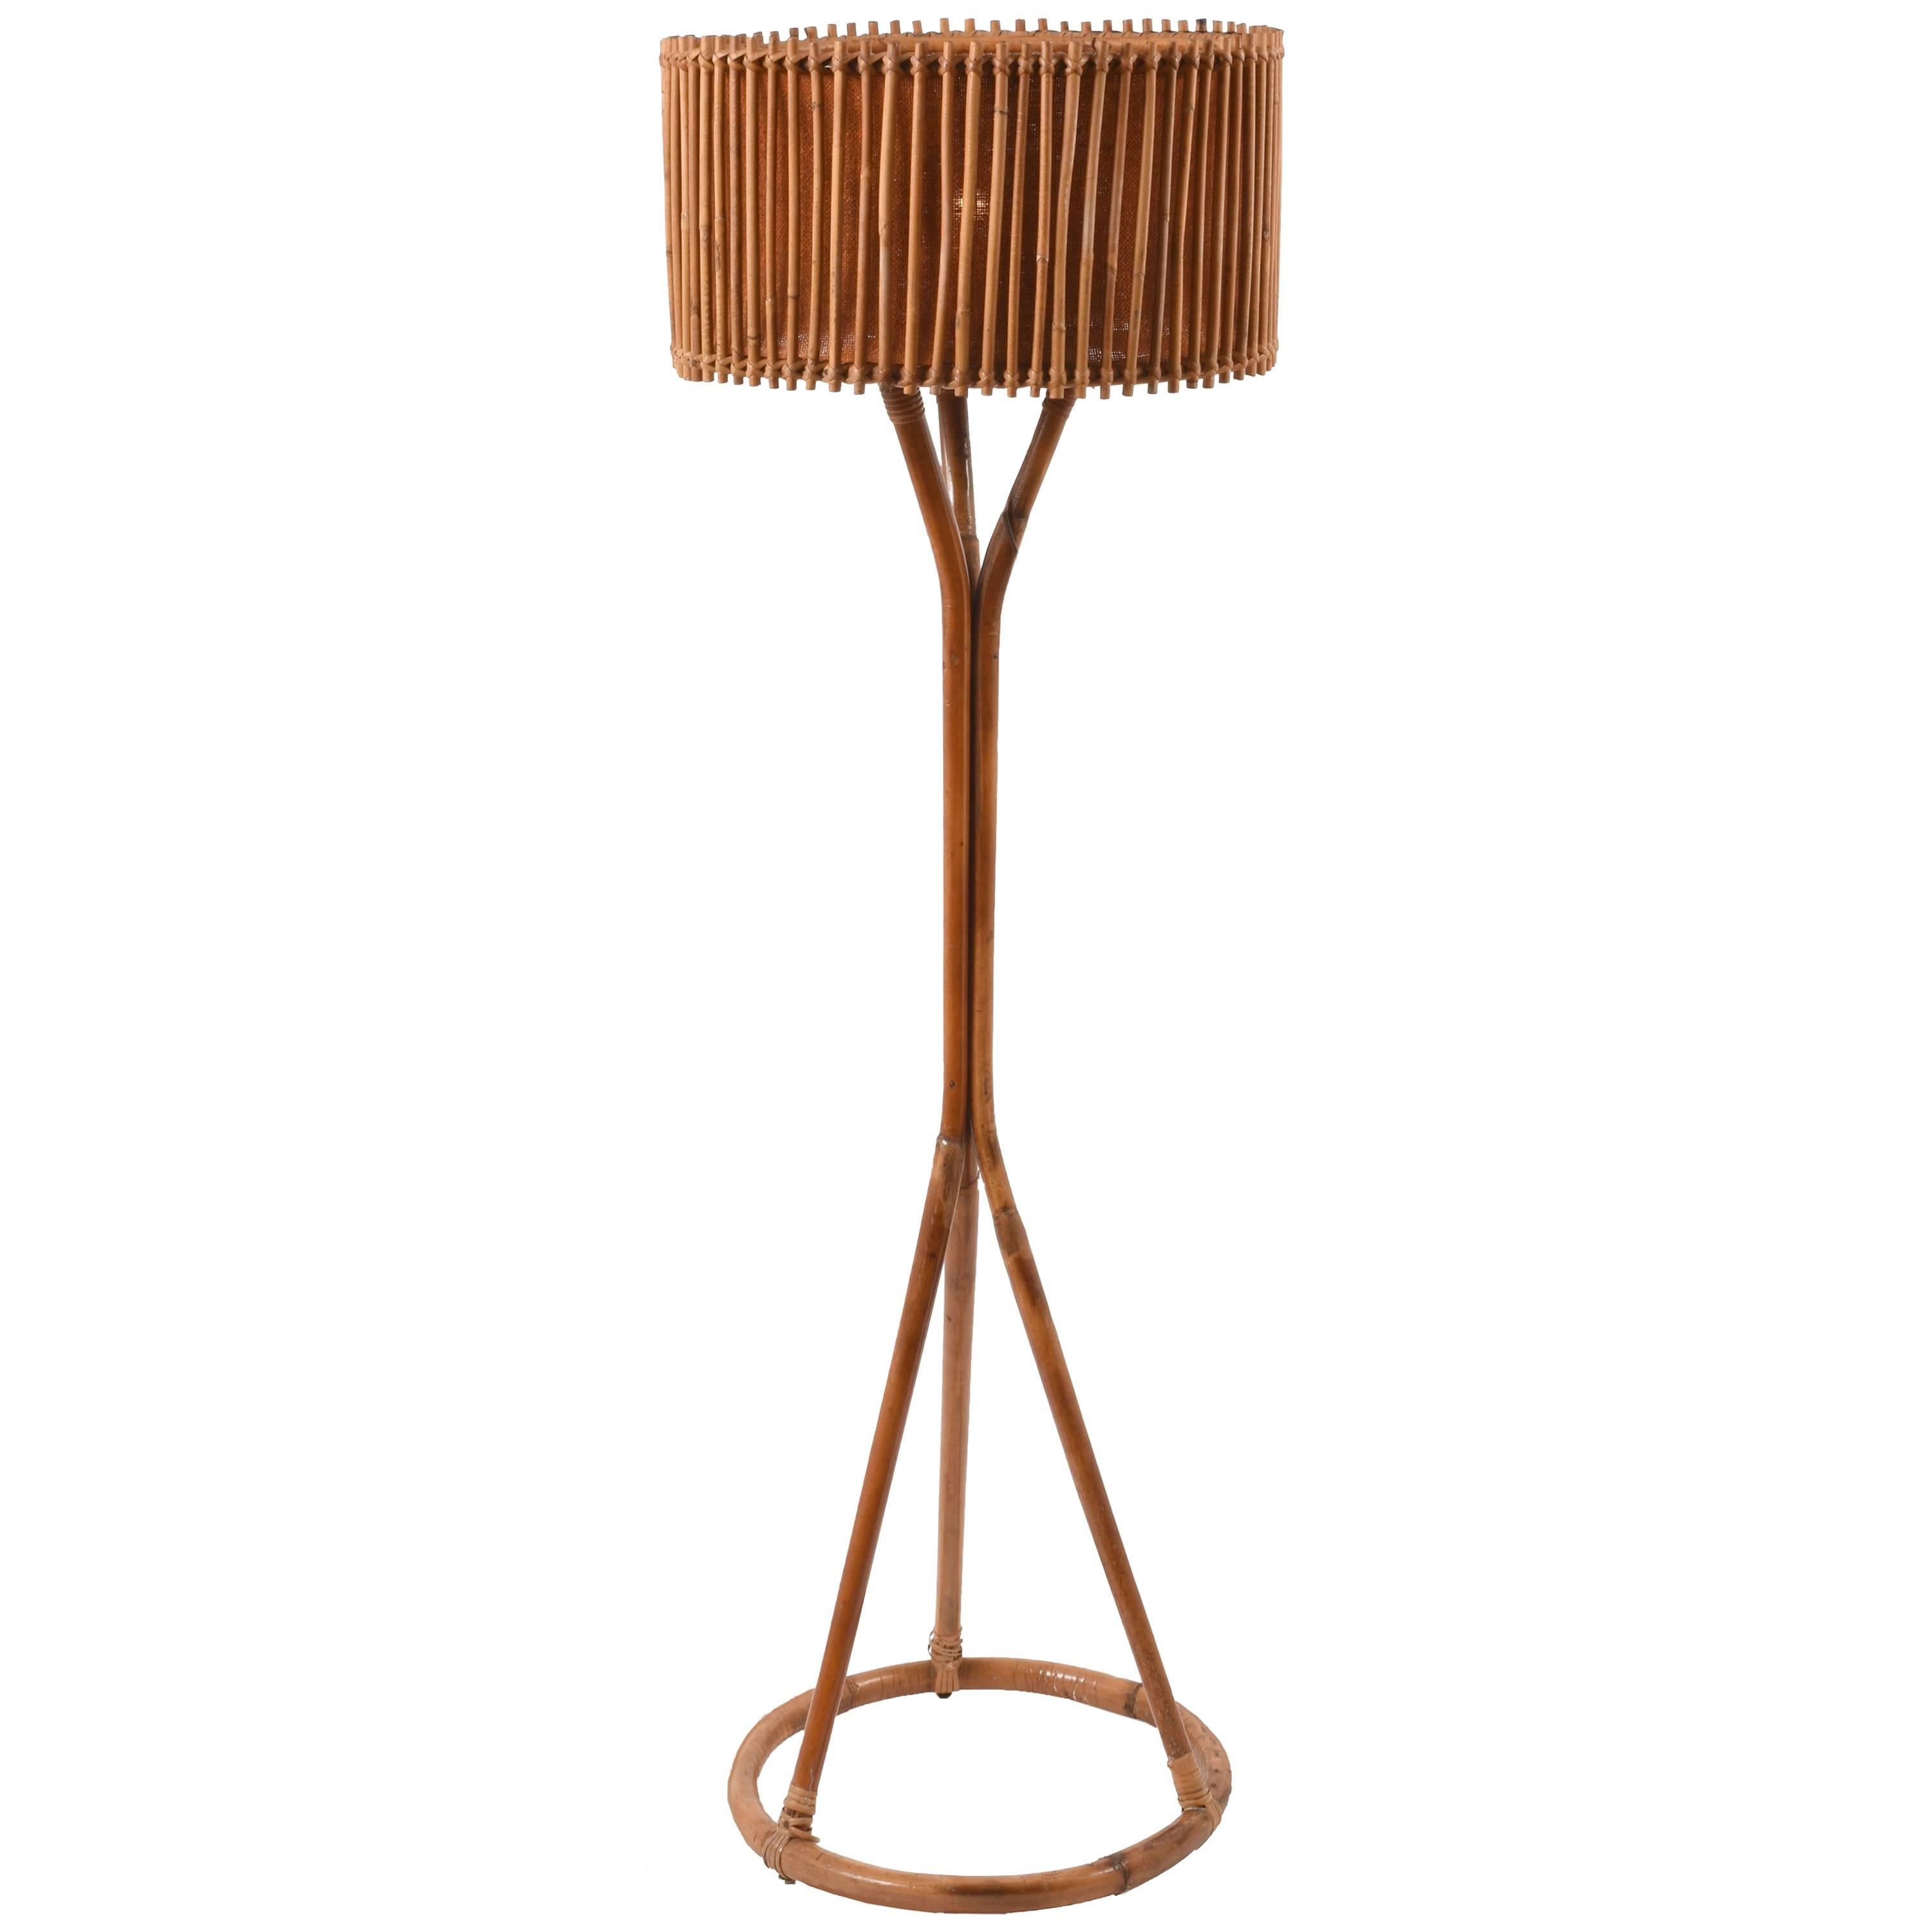 Floor Lamp, Midcentury Franco Albini Style Bamboo and Rattan, Italy, 1960s